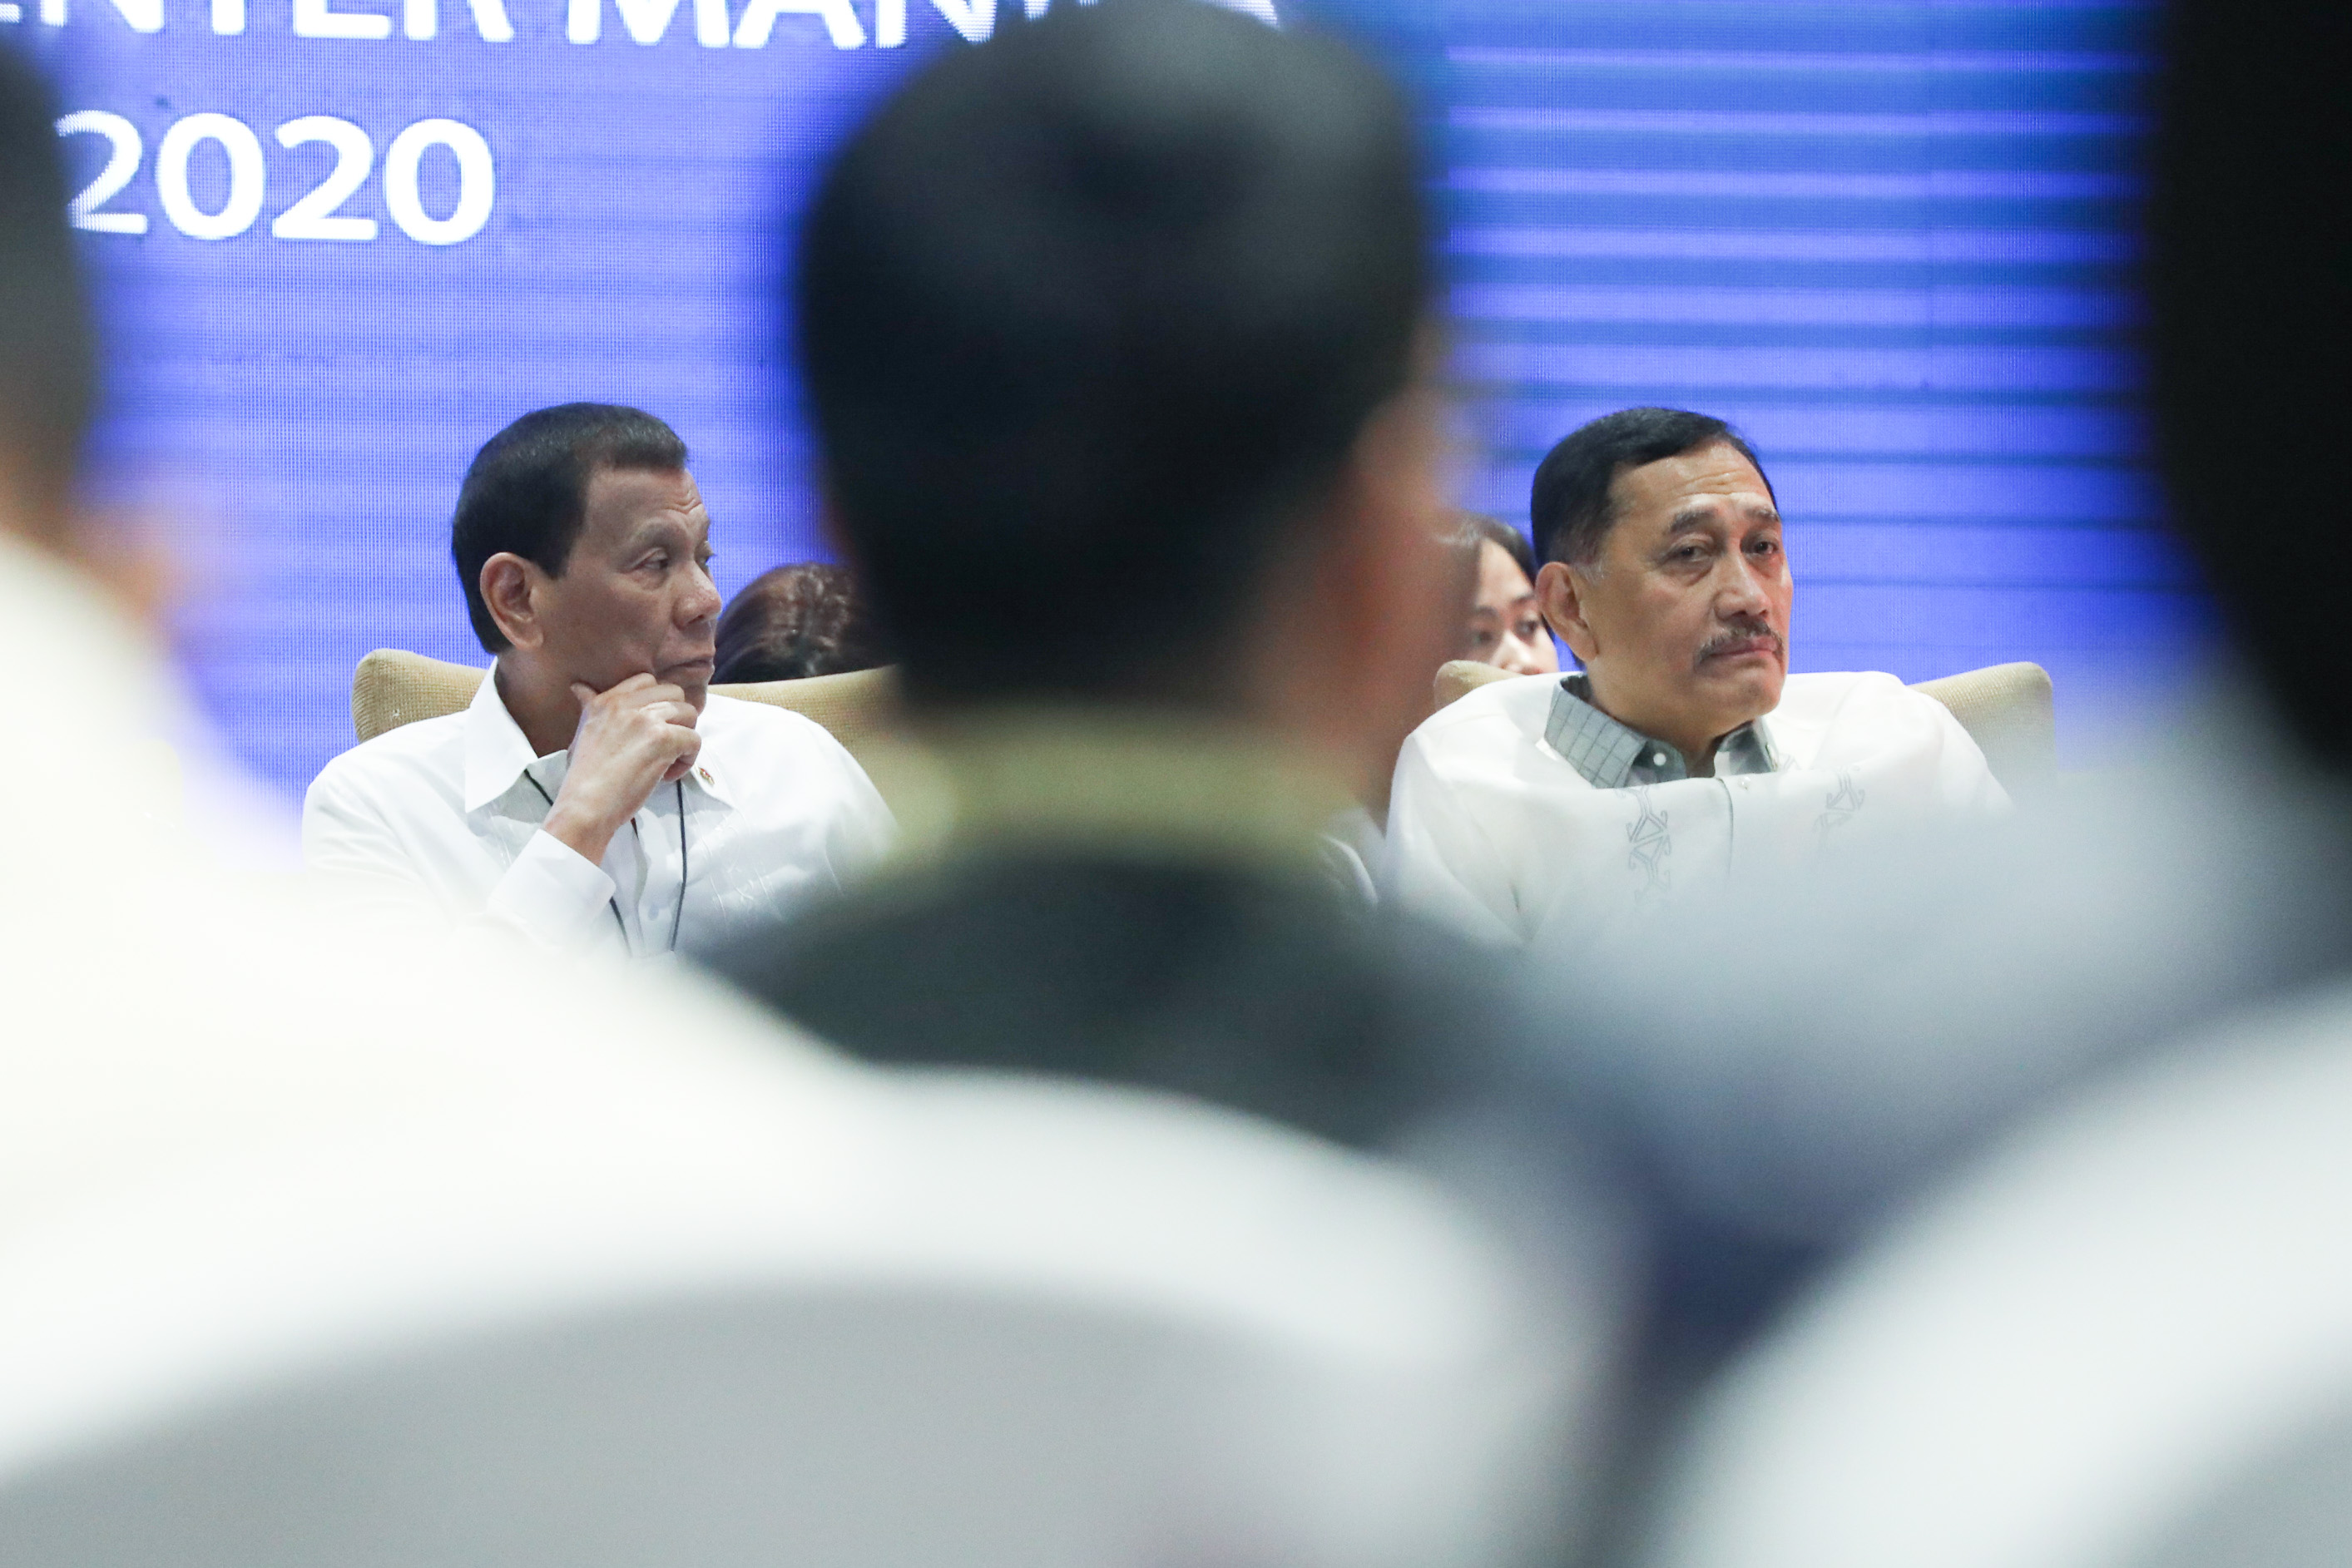 PH LEADERS. House Minority Leader Bienvenido Abante Jr (R) sits beside President Rodrigo Duterte (L) during the celebration of the 120-year presence of the Baptist Churches in the Philippines at the SMX Convention Center in Pasay City on January 16, 2020. File photo by Valerie Escalera/Presidential Photo 